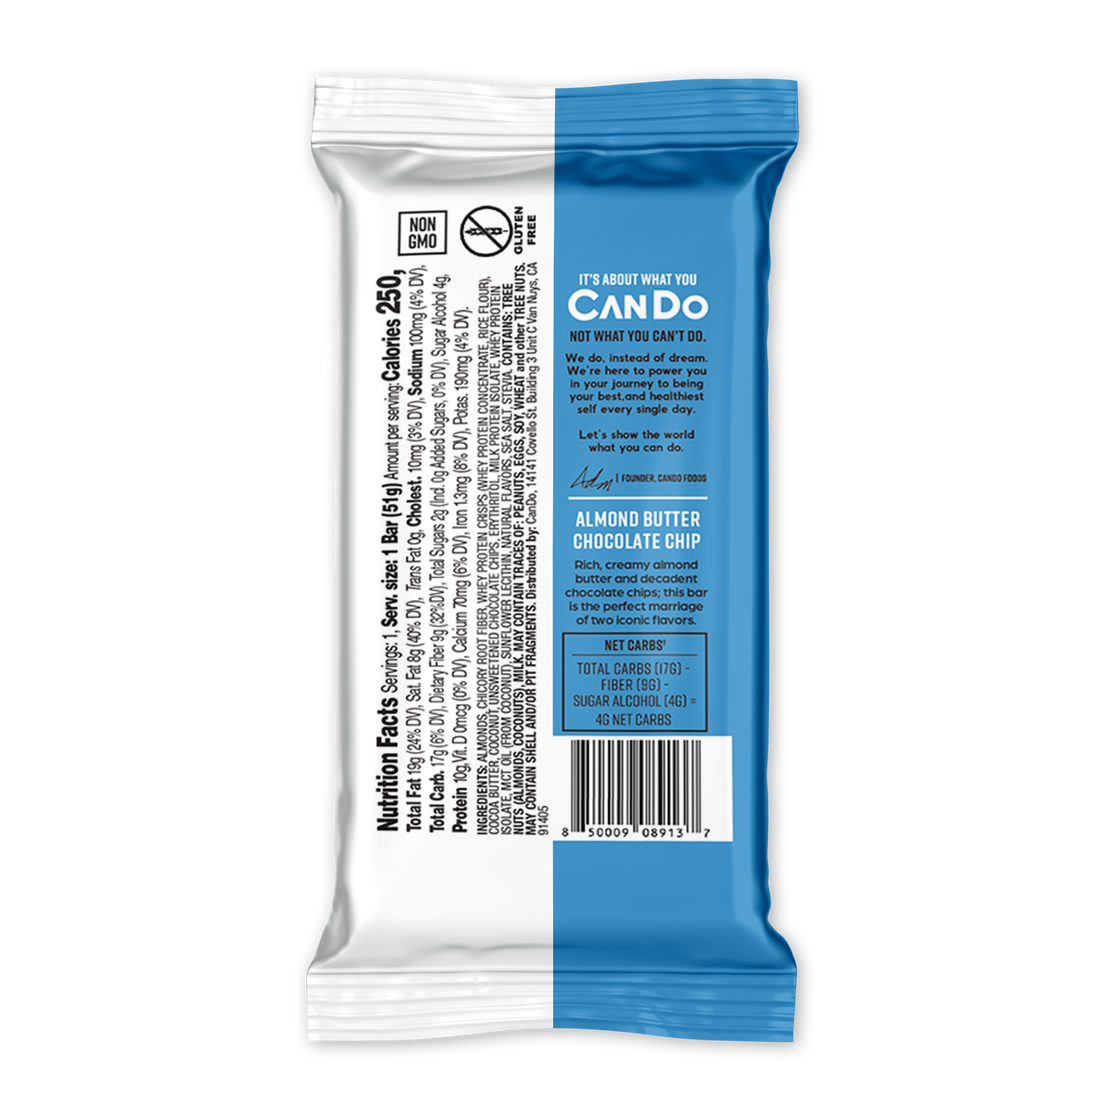 Keto Krisp Protein Bar by CanDo - Almond Butter Chocolate Chip - High-quality Protein Bars by CanDo at 